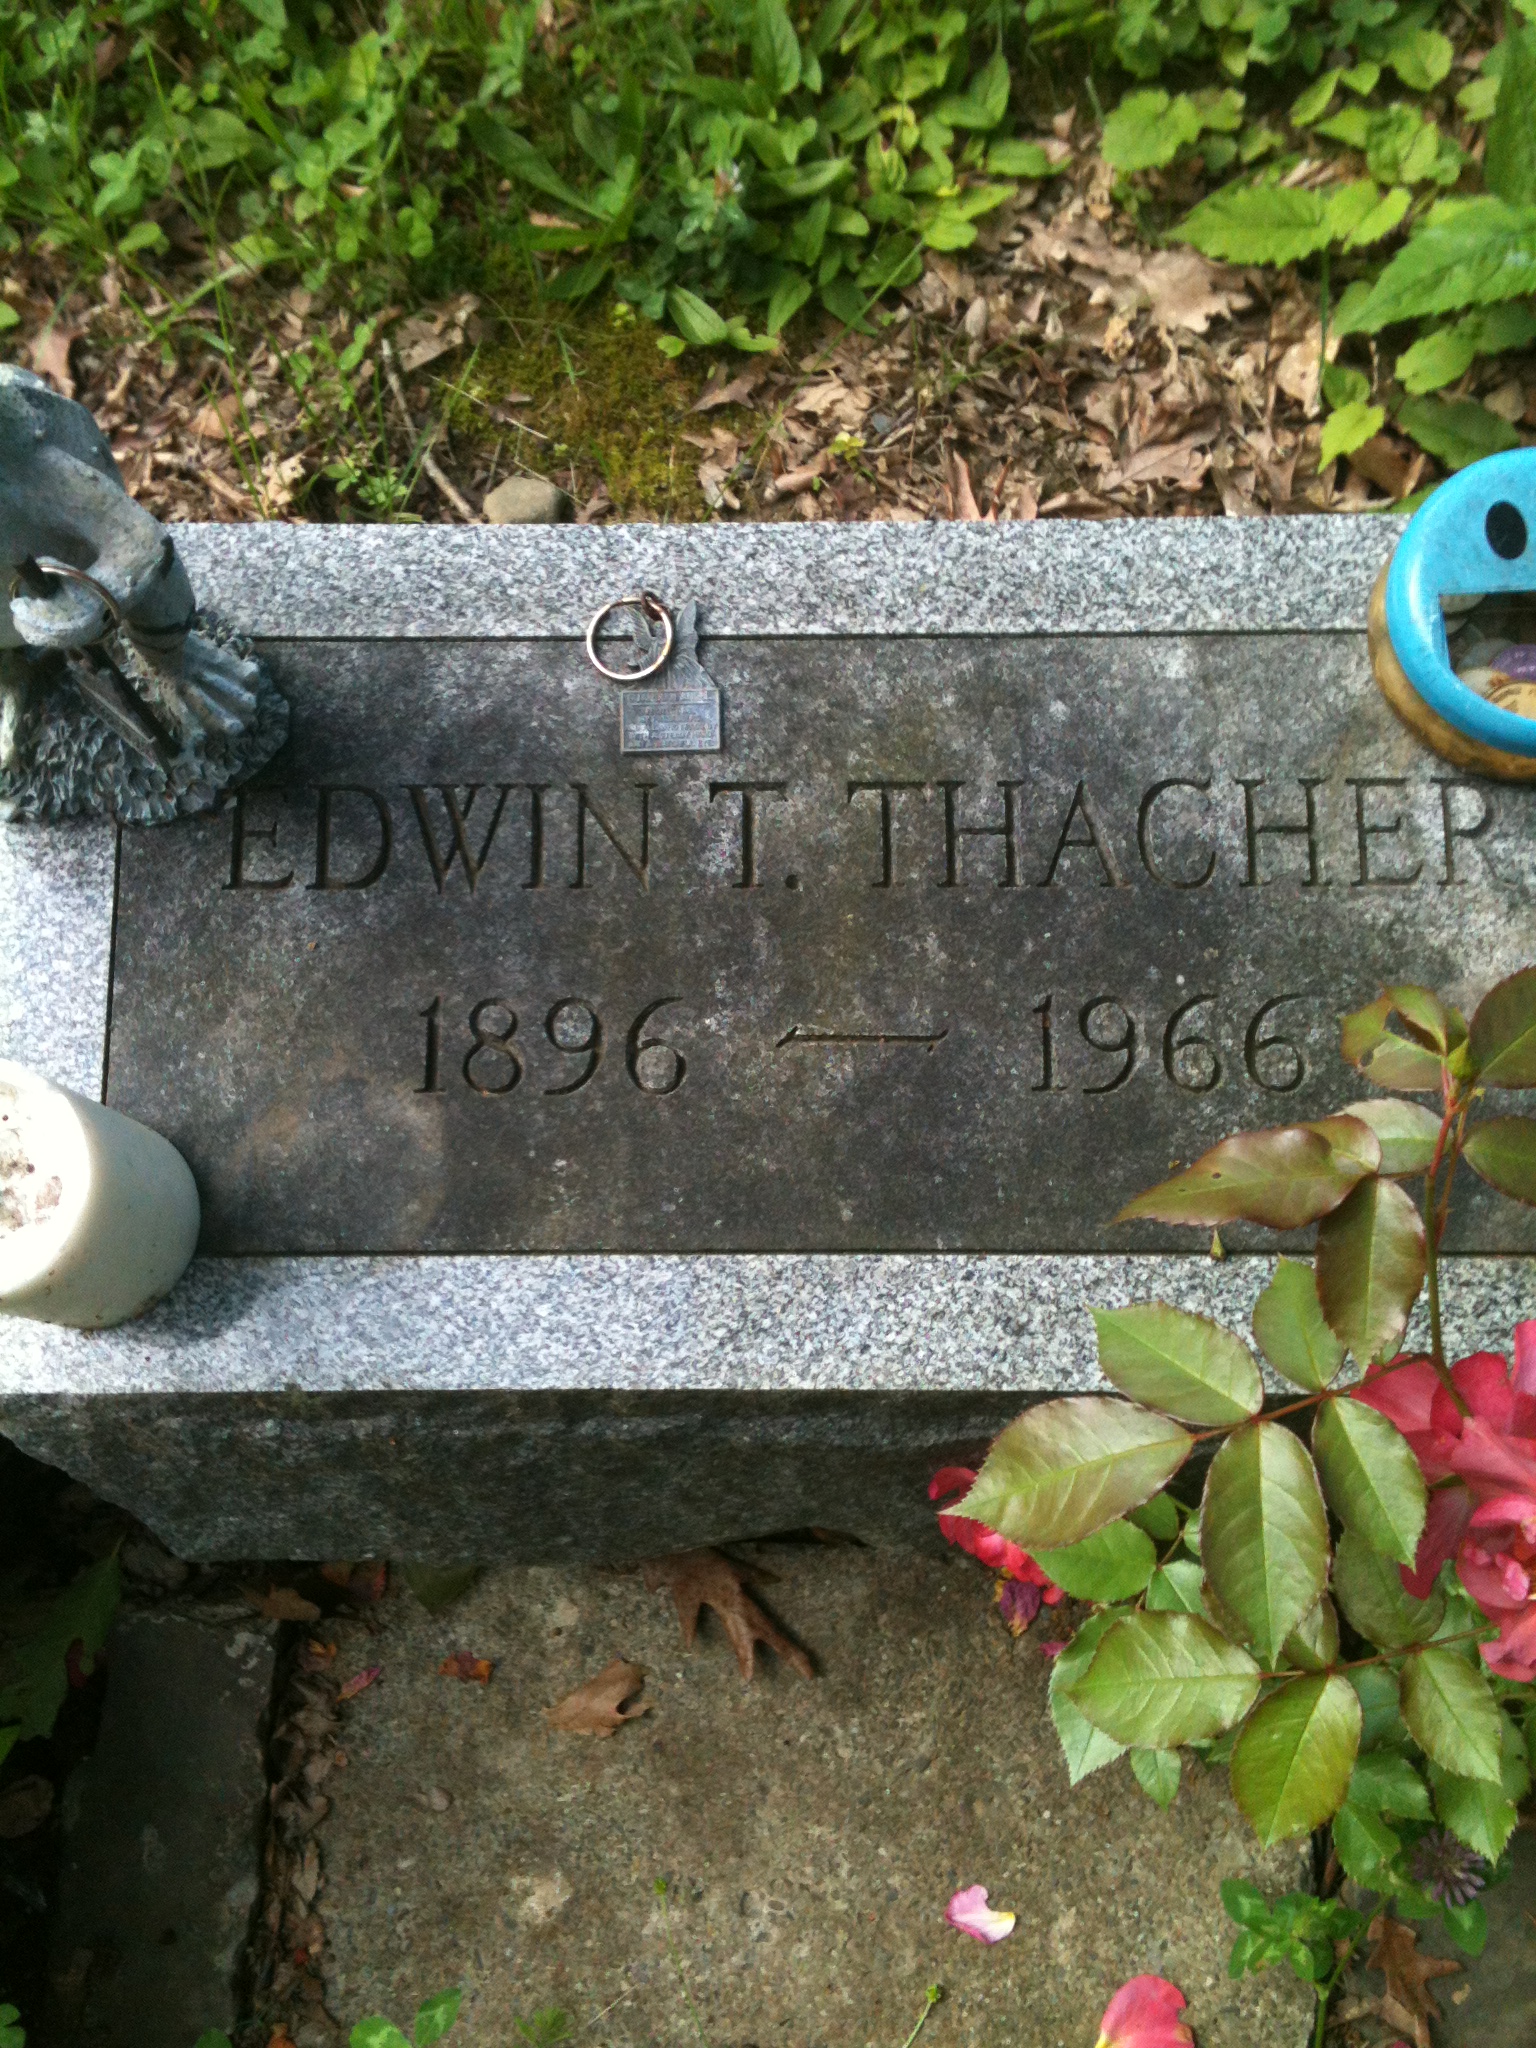 a headstone sits near some flowers and plants